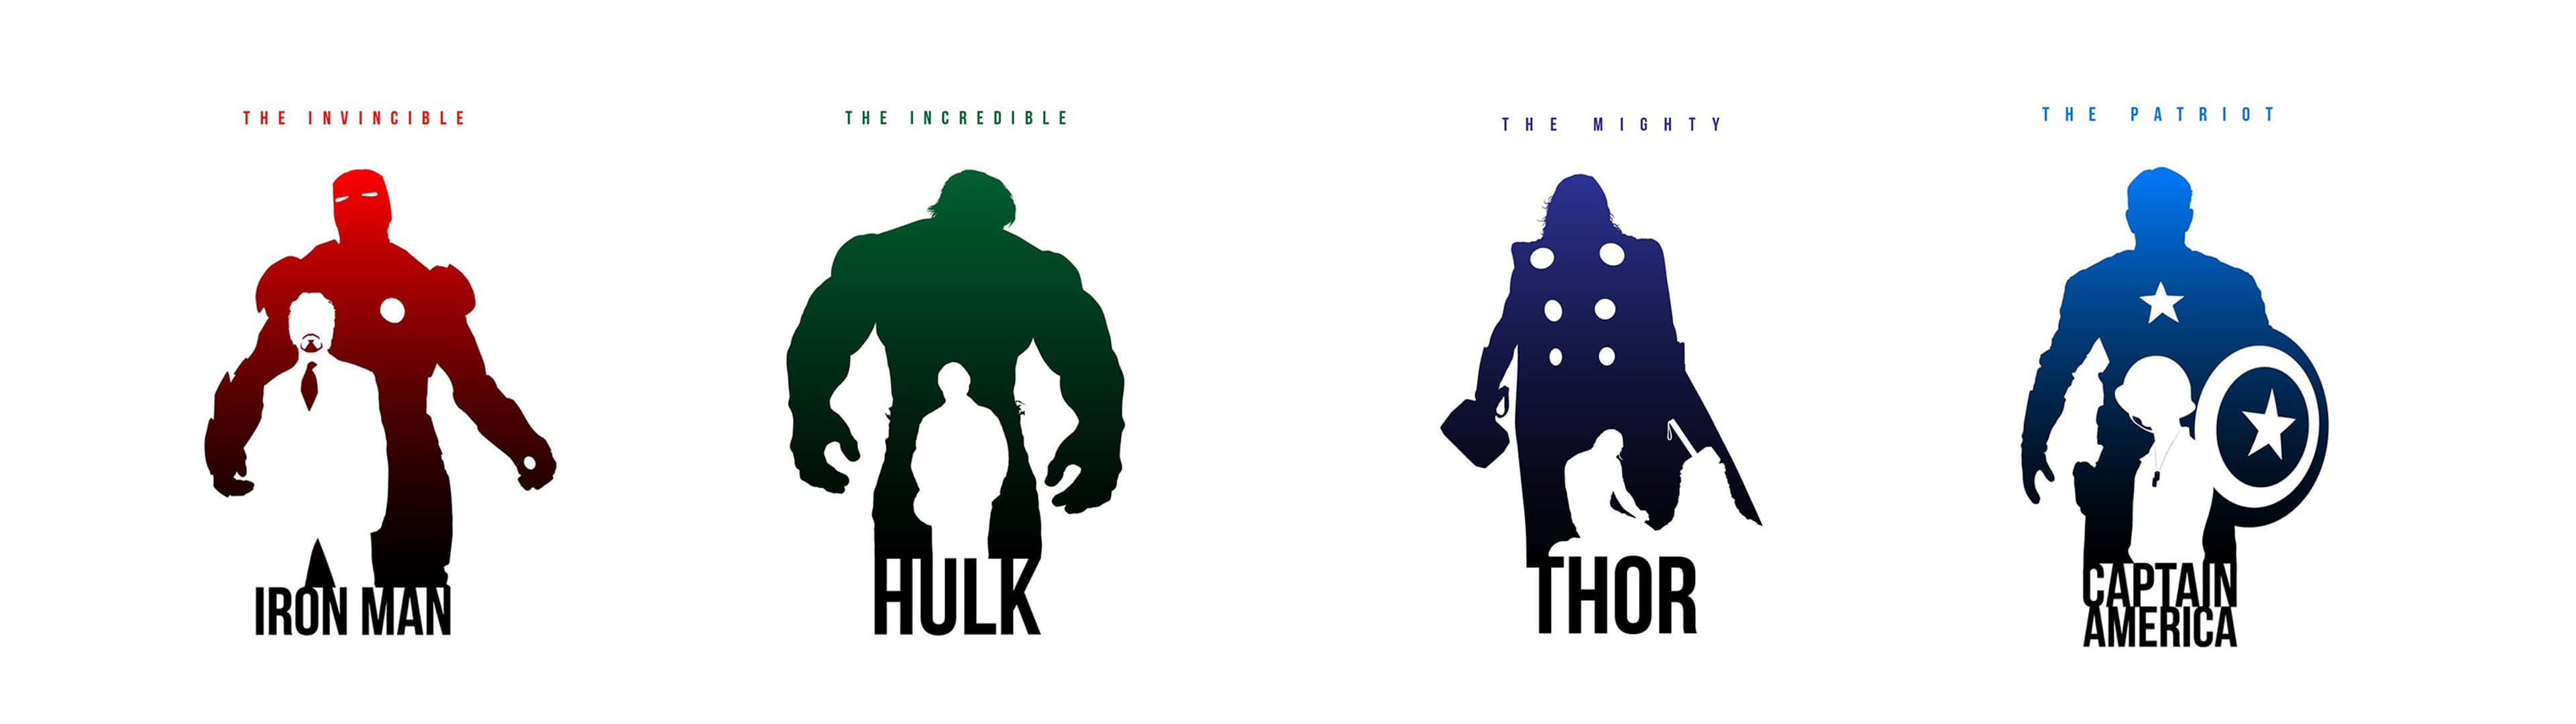 The Avengers Silhouettes In Different Colors Wallpaper